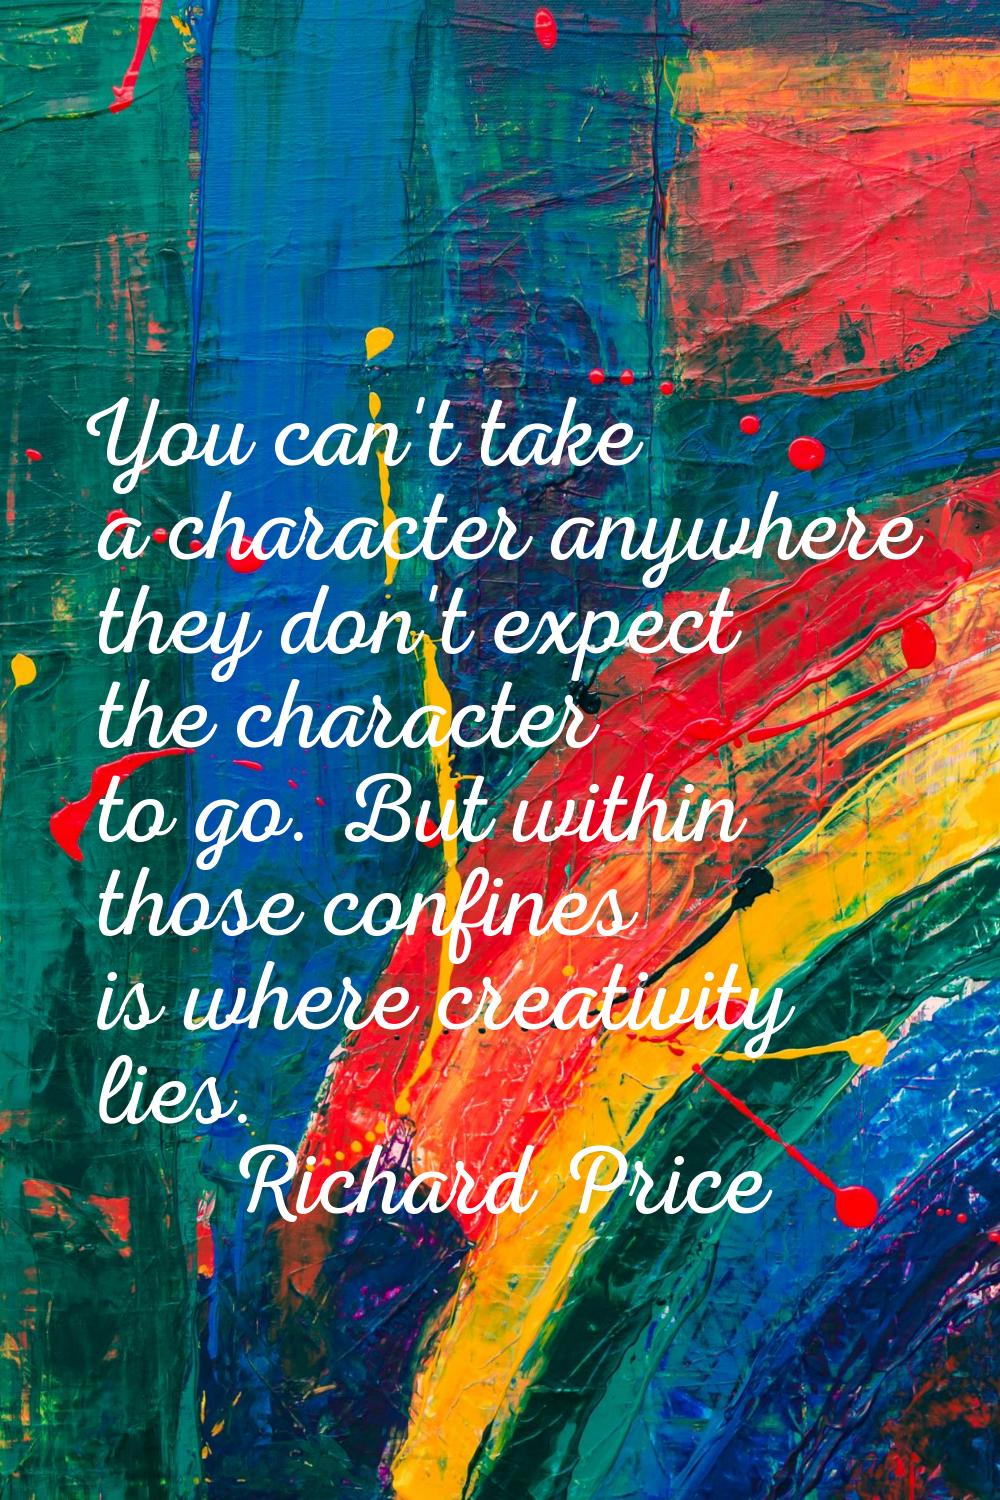 You can't take a character anywhere they don't expect the character to go. But within those confine